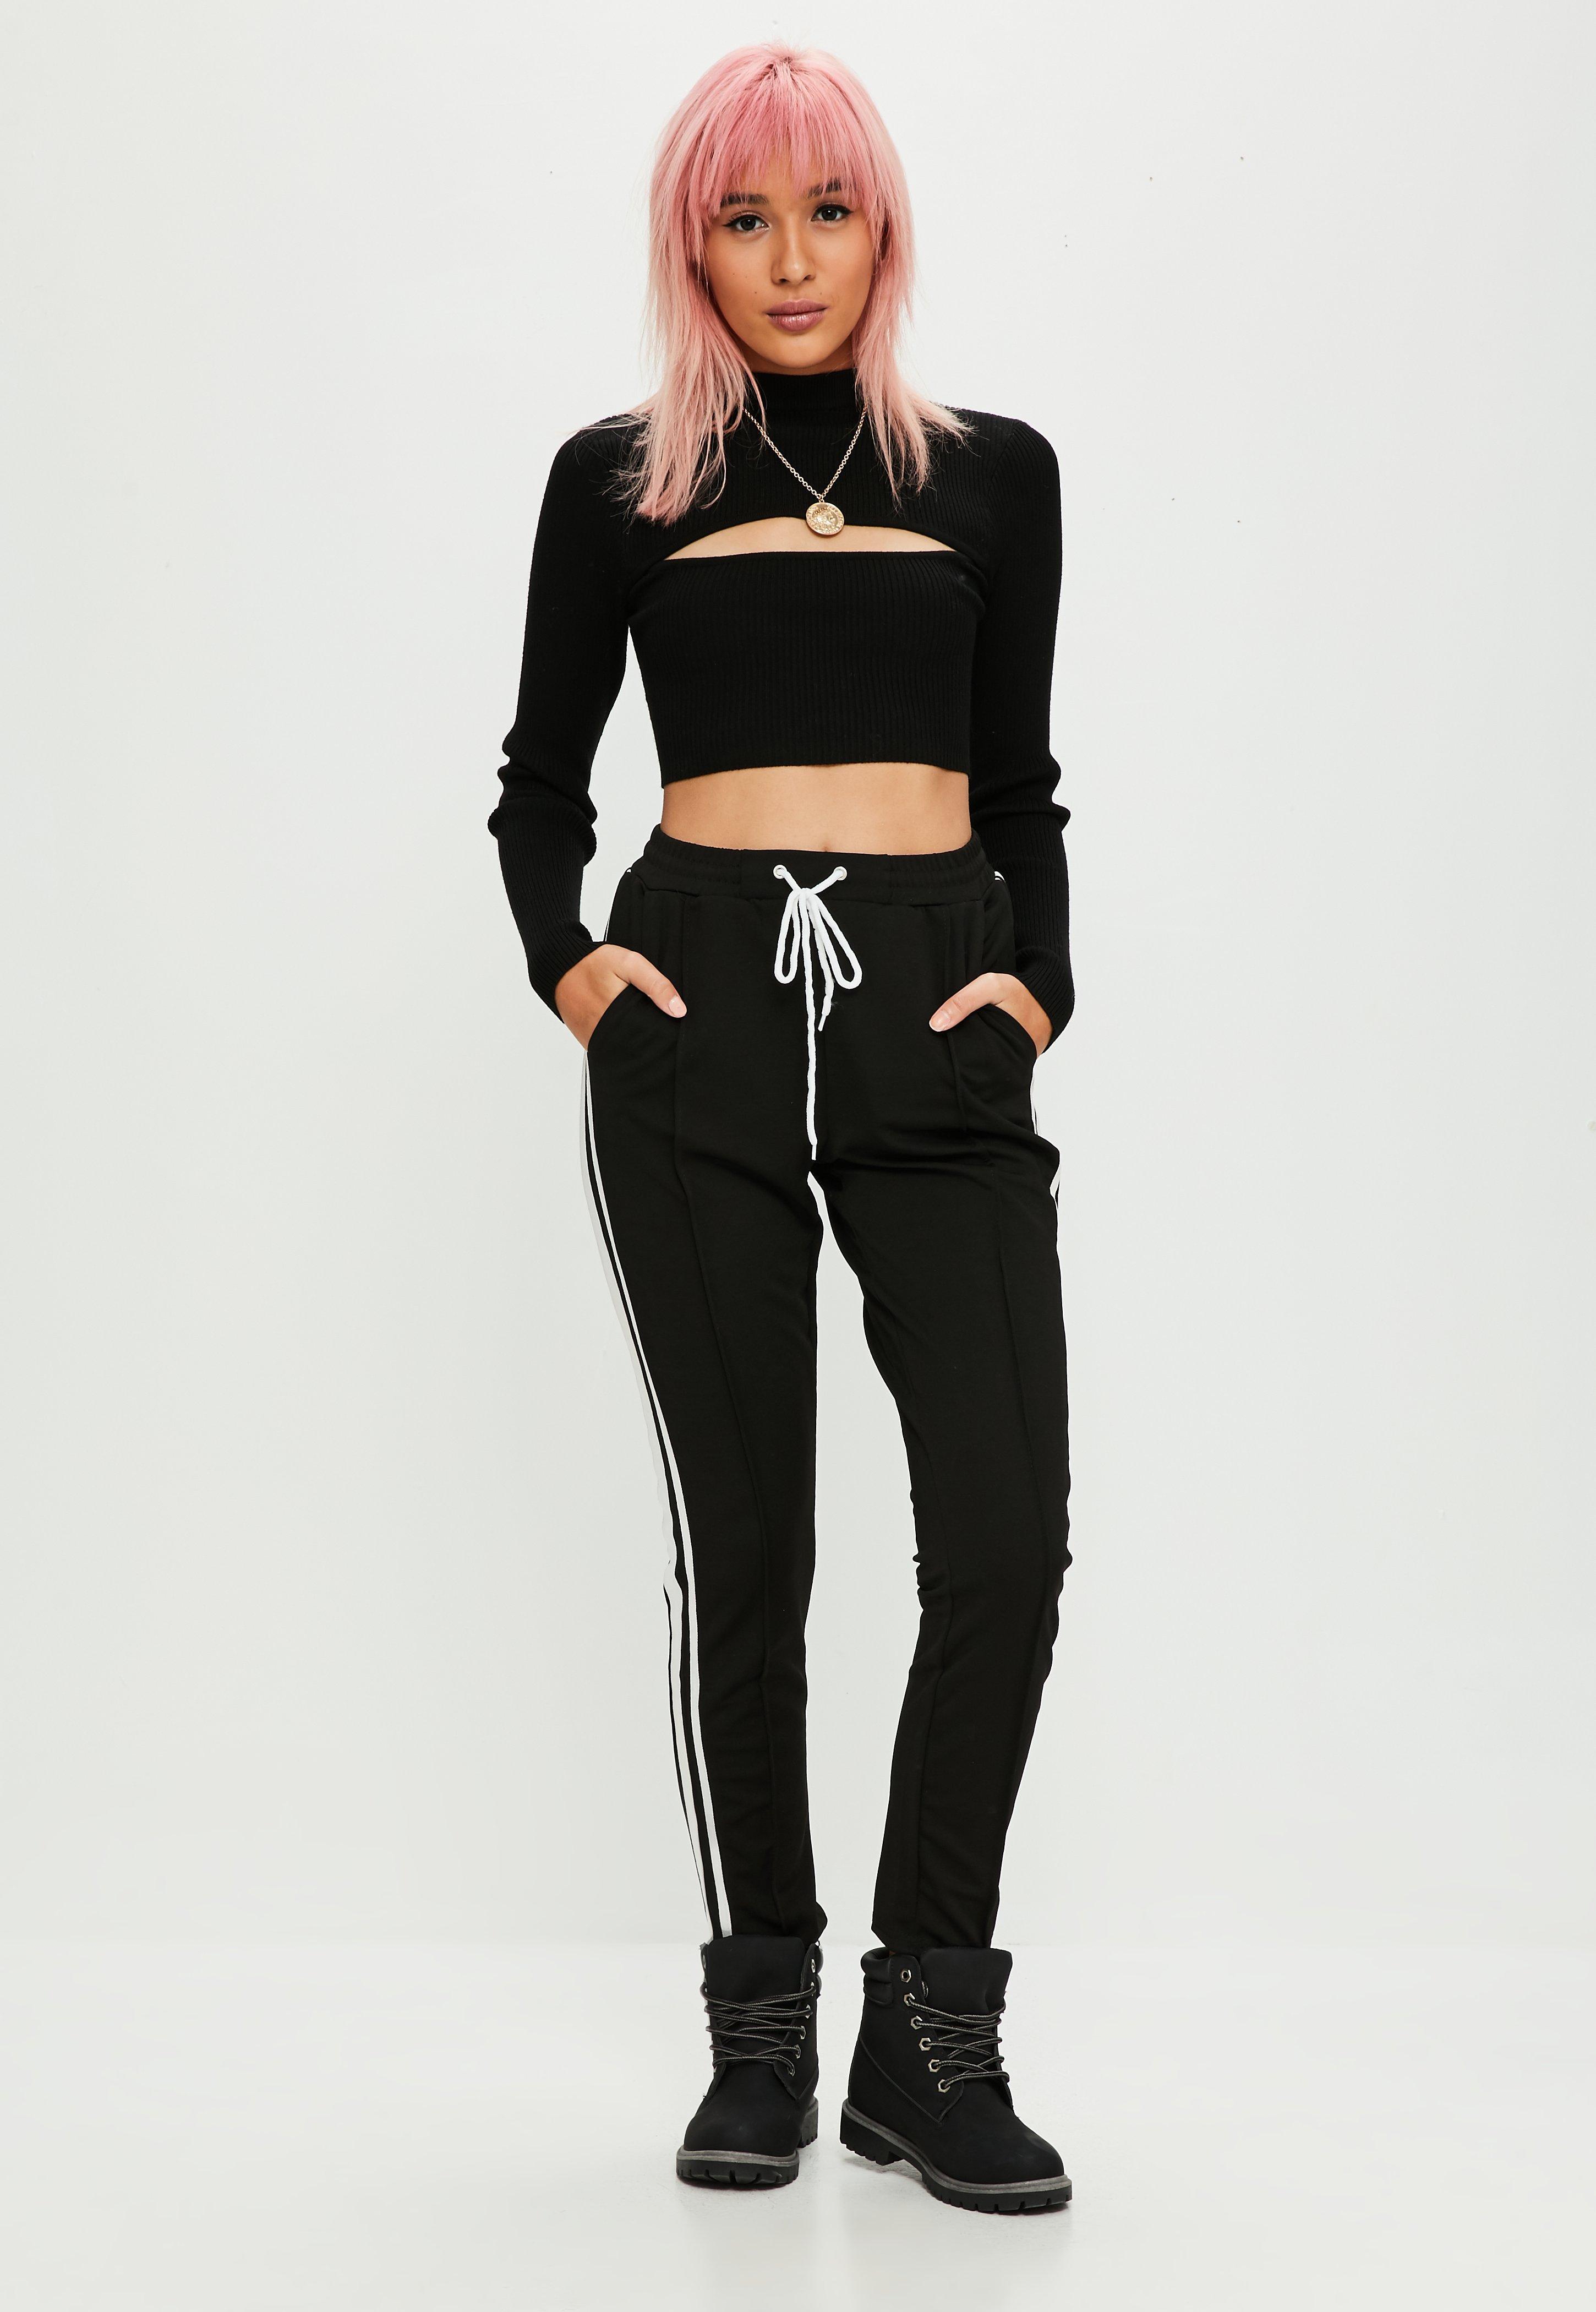 Lyst - Missguided Black Knitted Crop Top in Black